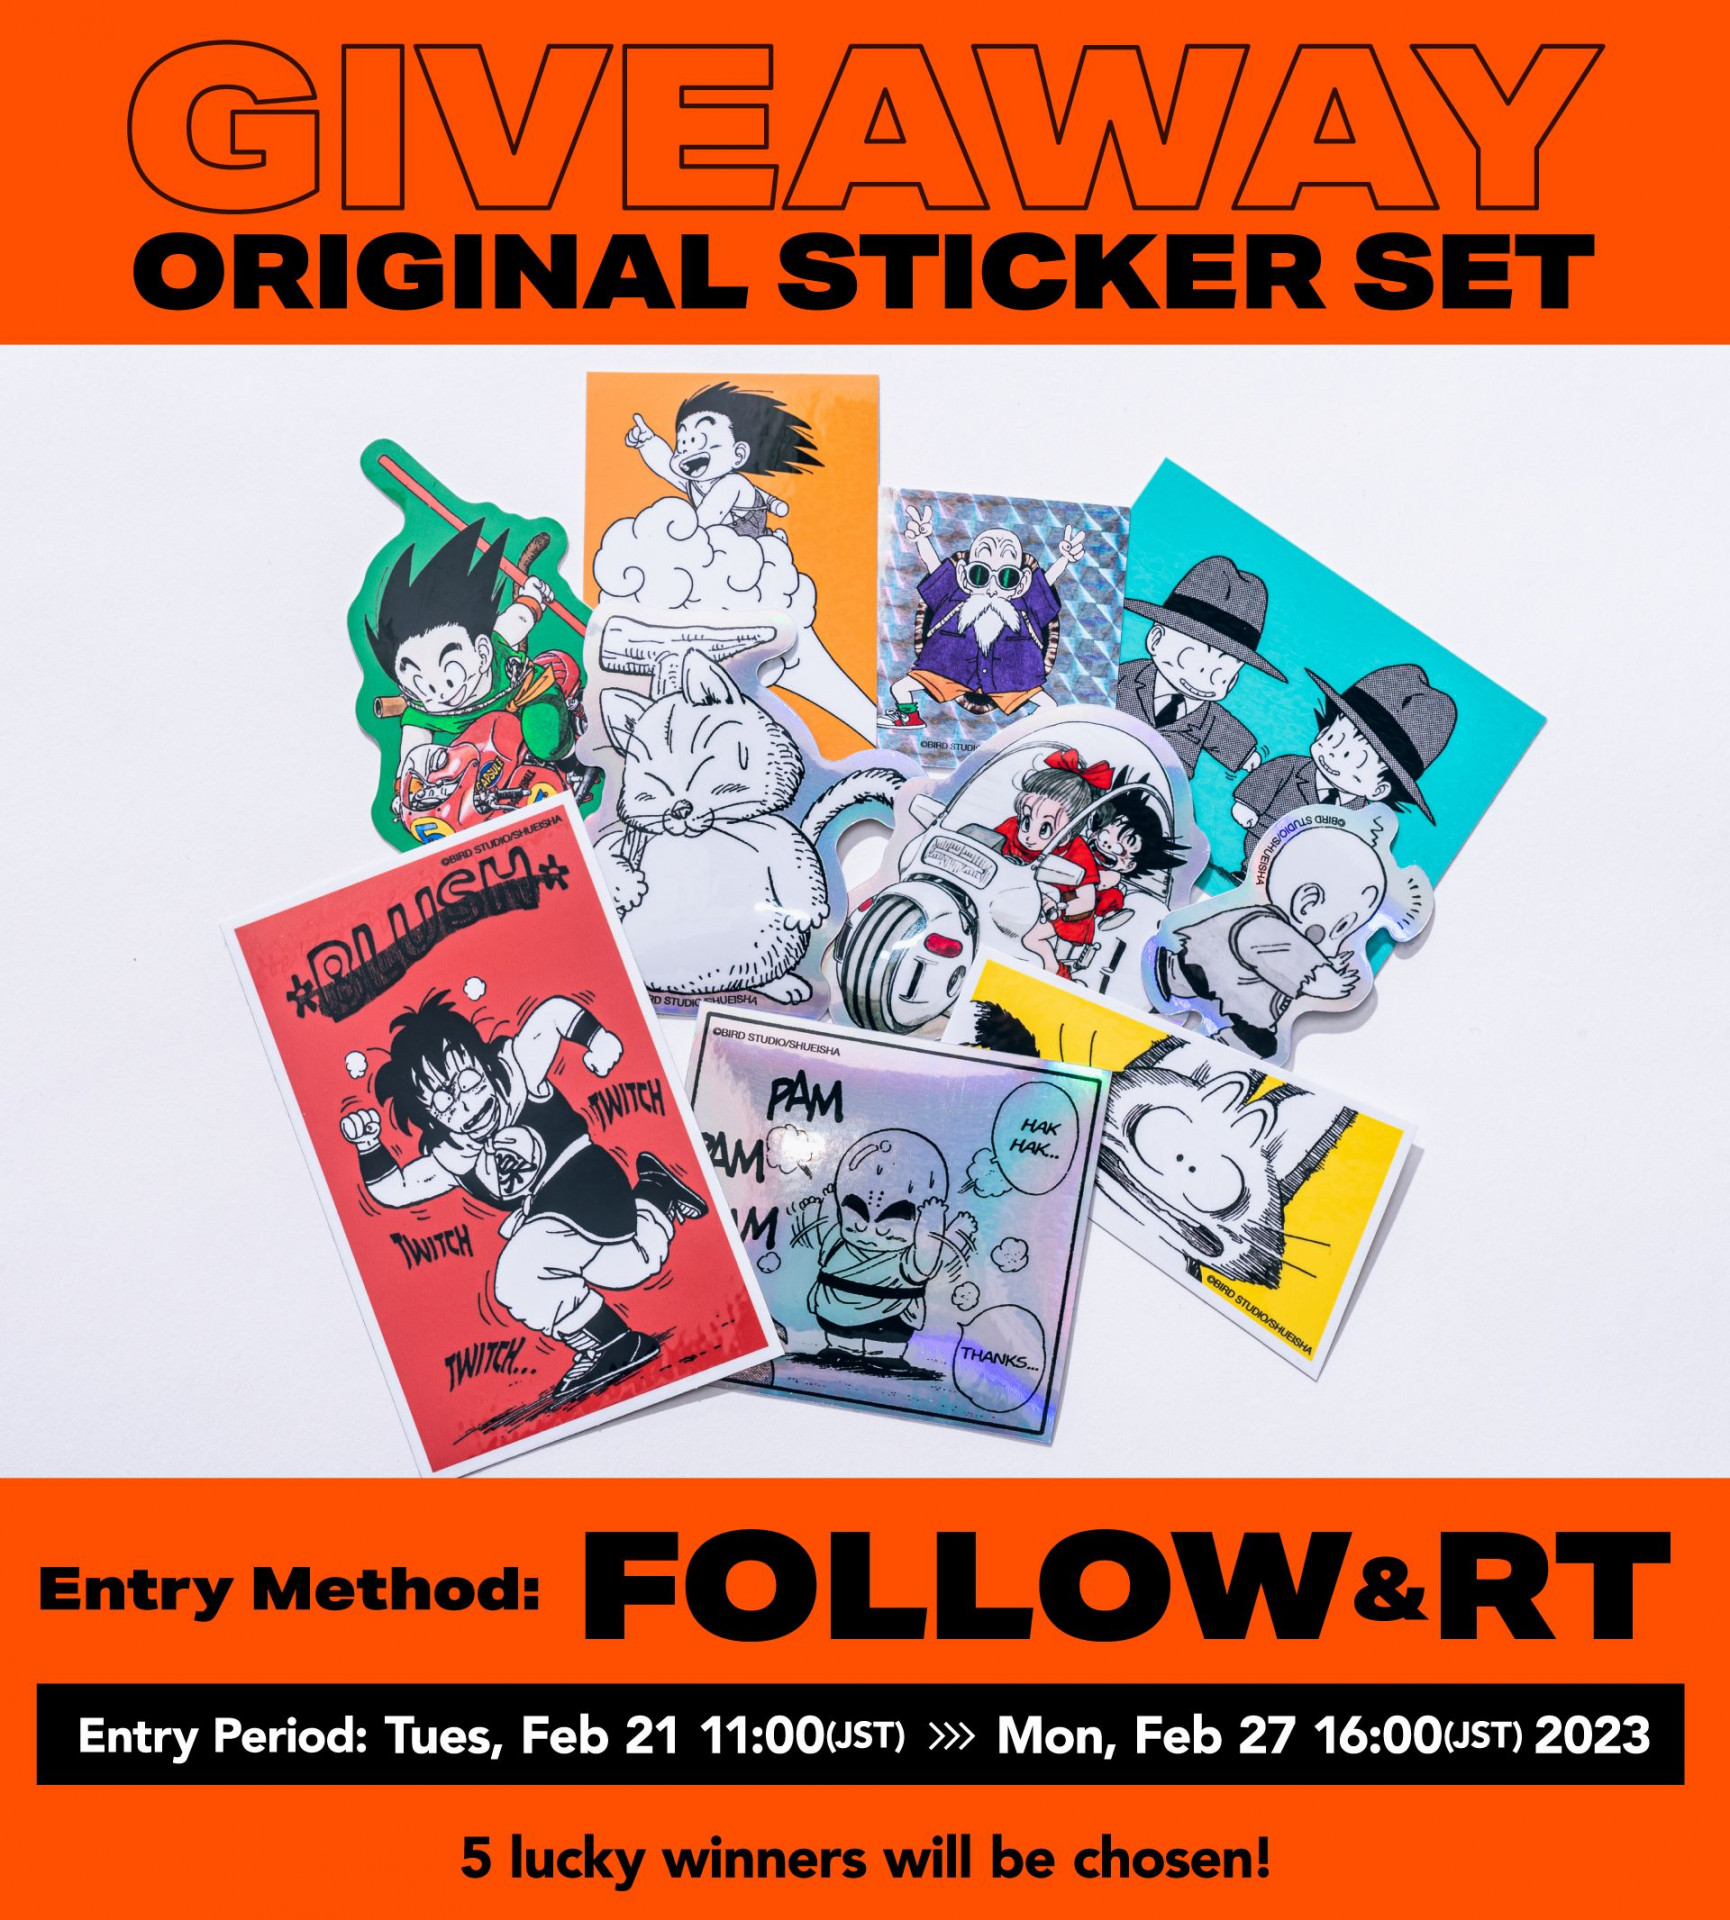 Win an Original Sticker Set! Check Out the Battle Hour Celebration Campaign on Twitter! (Ends Feb 26 @23:00 PST!)